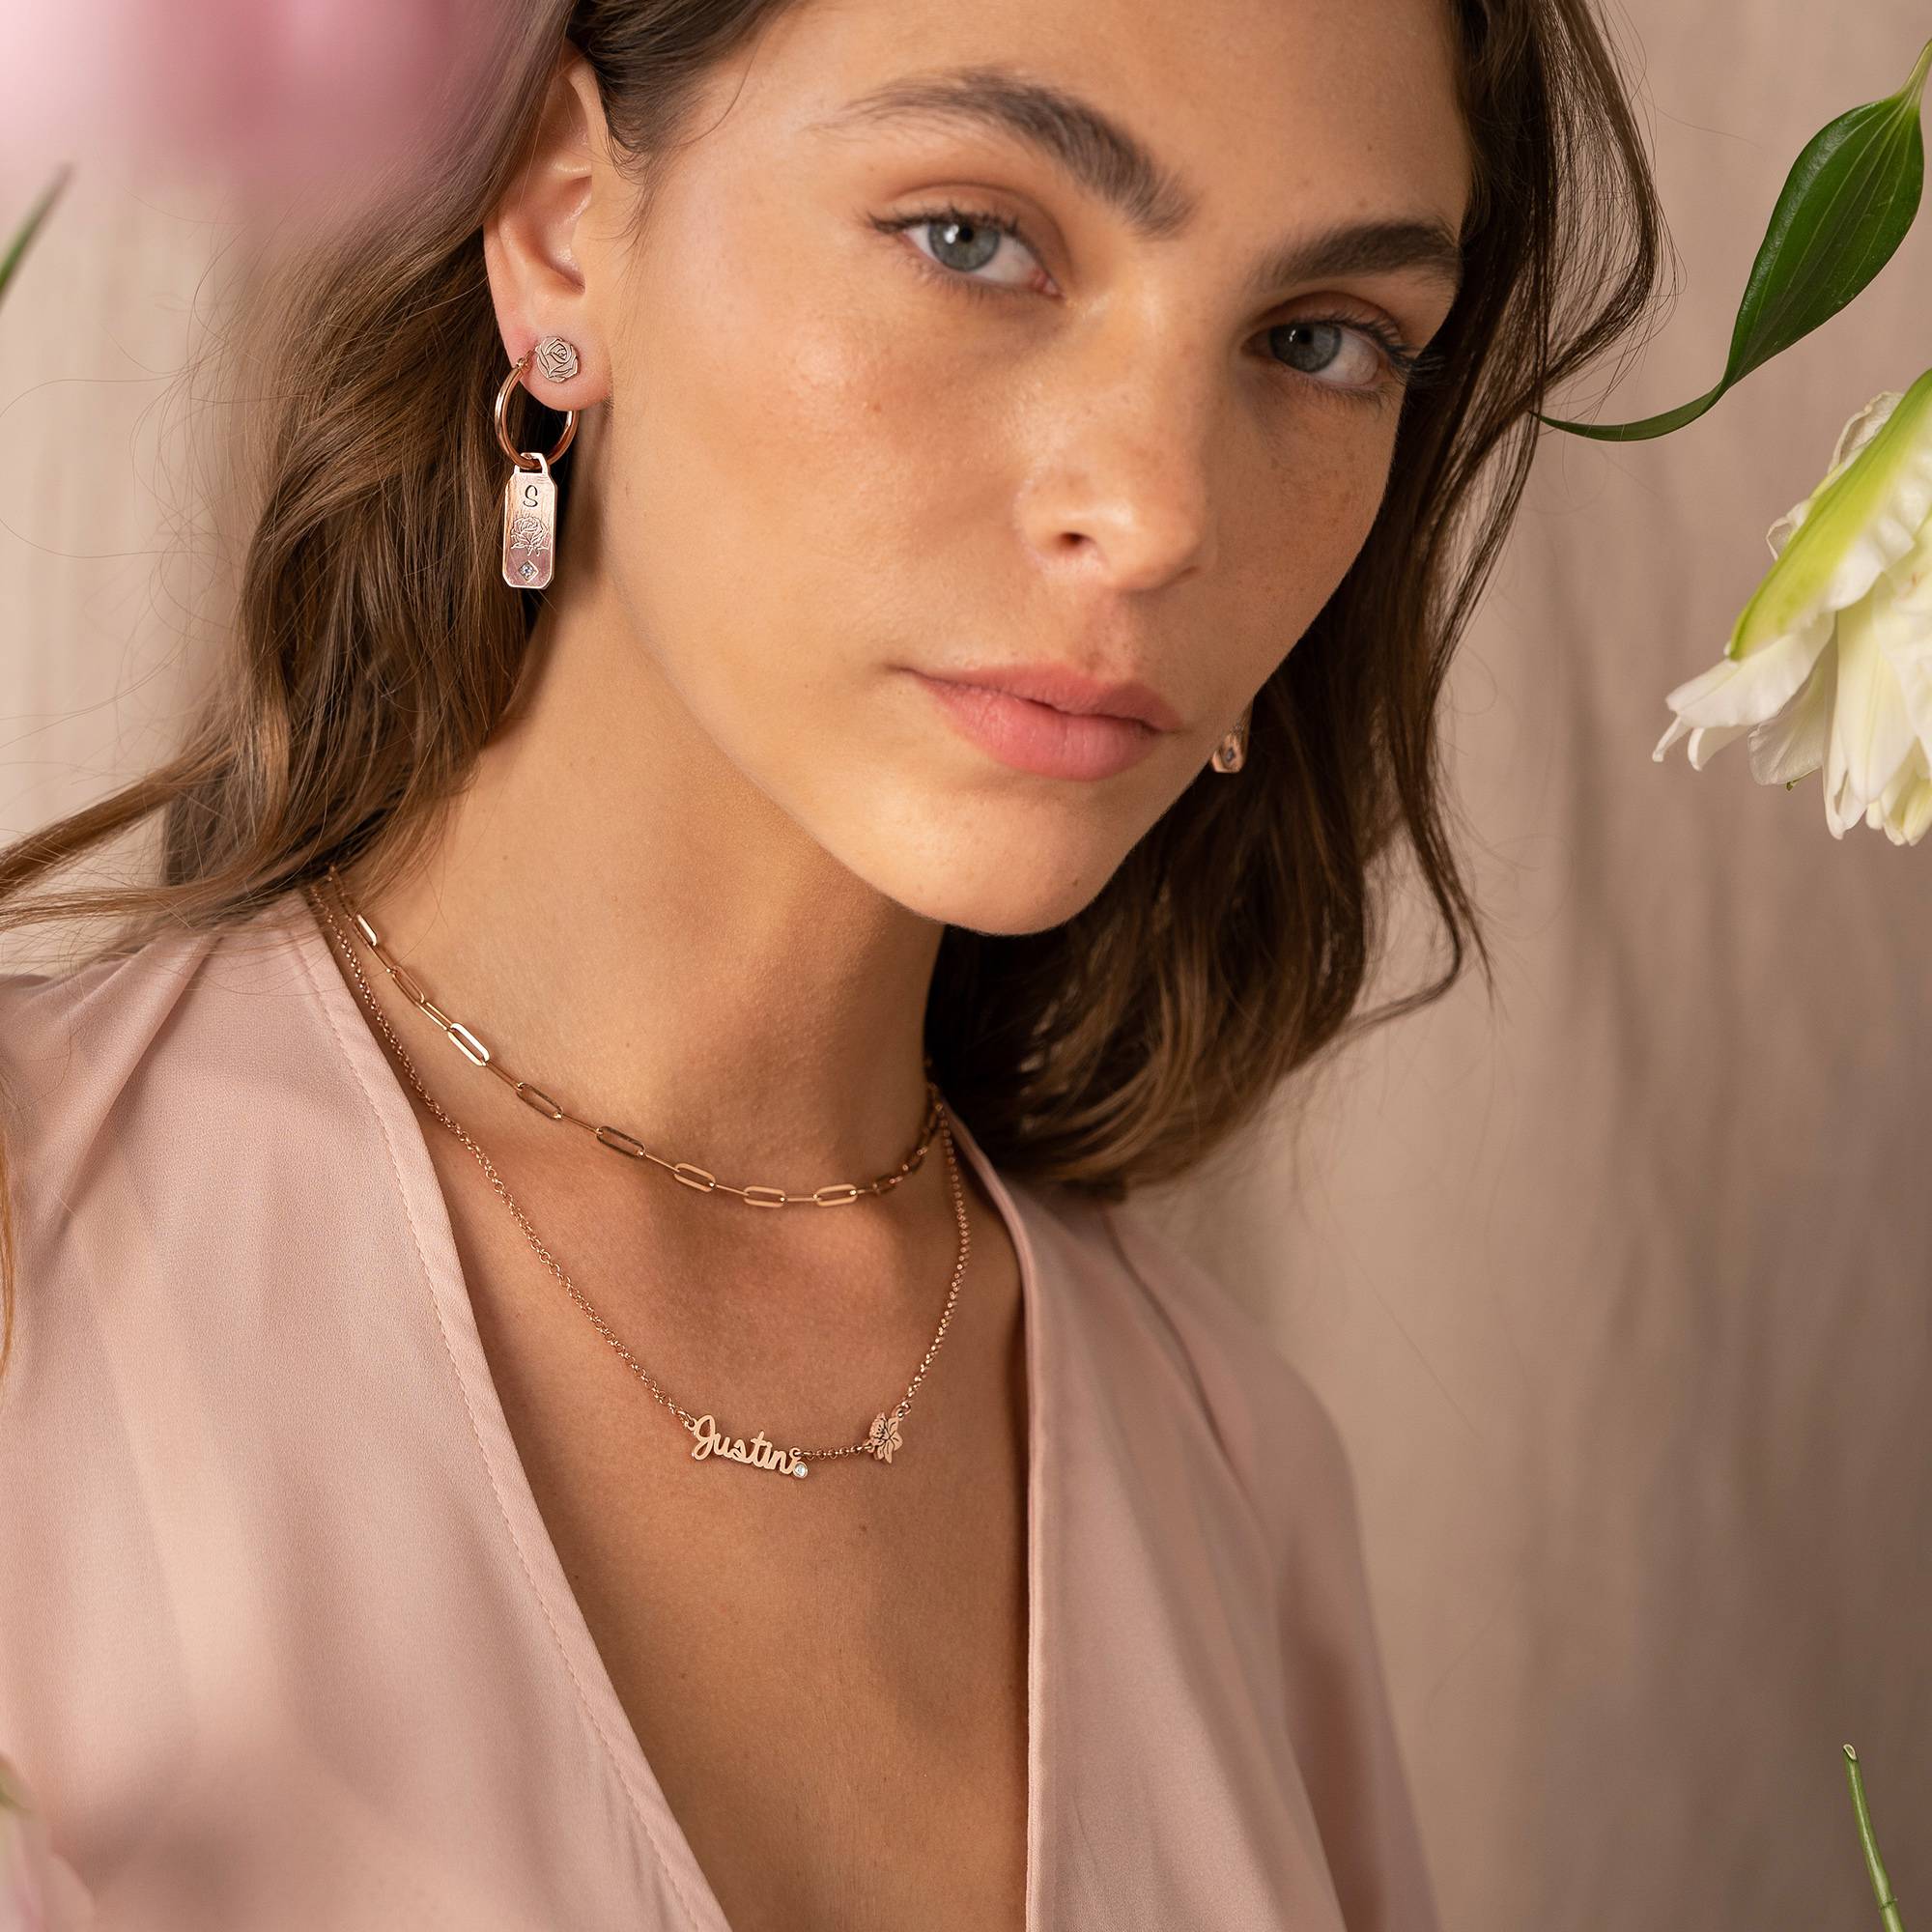 Blooming Birth Flower Multi Name Necklace with Diamond in 18K Rose Gold Vermeil-1 product photo